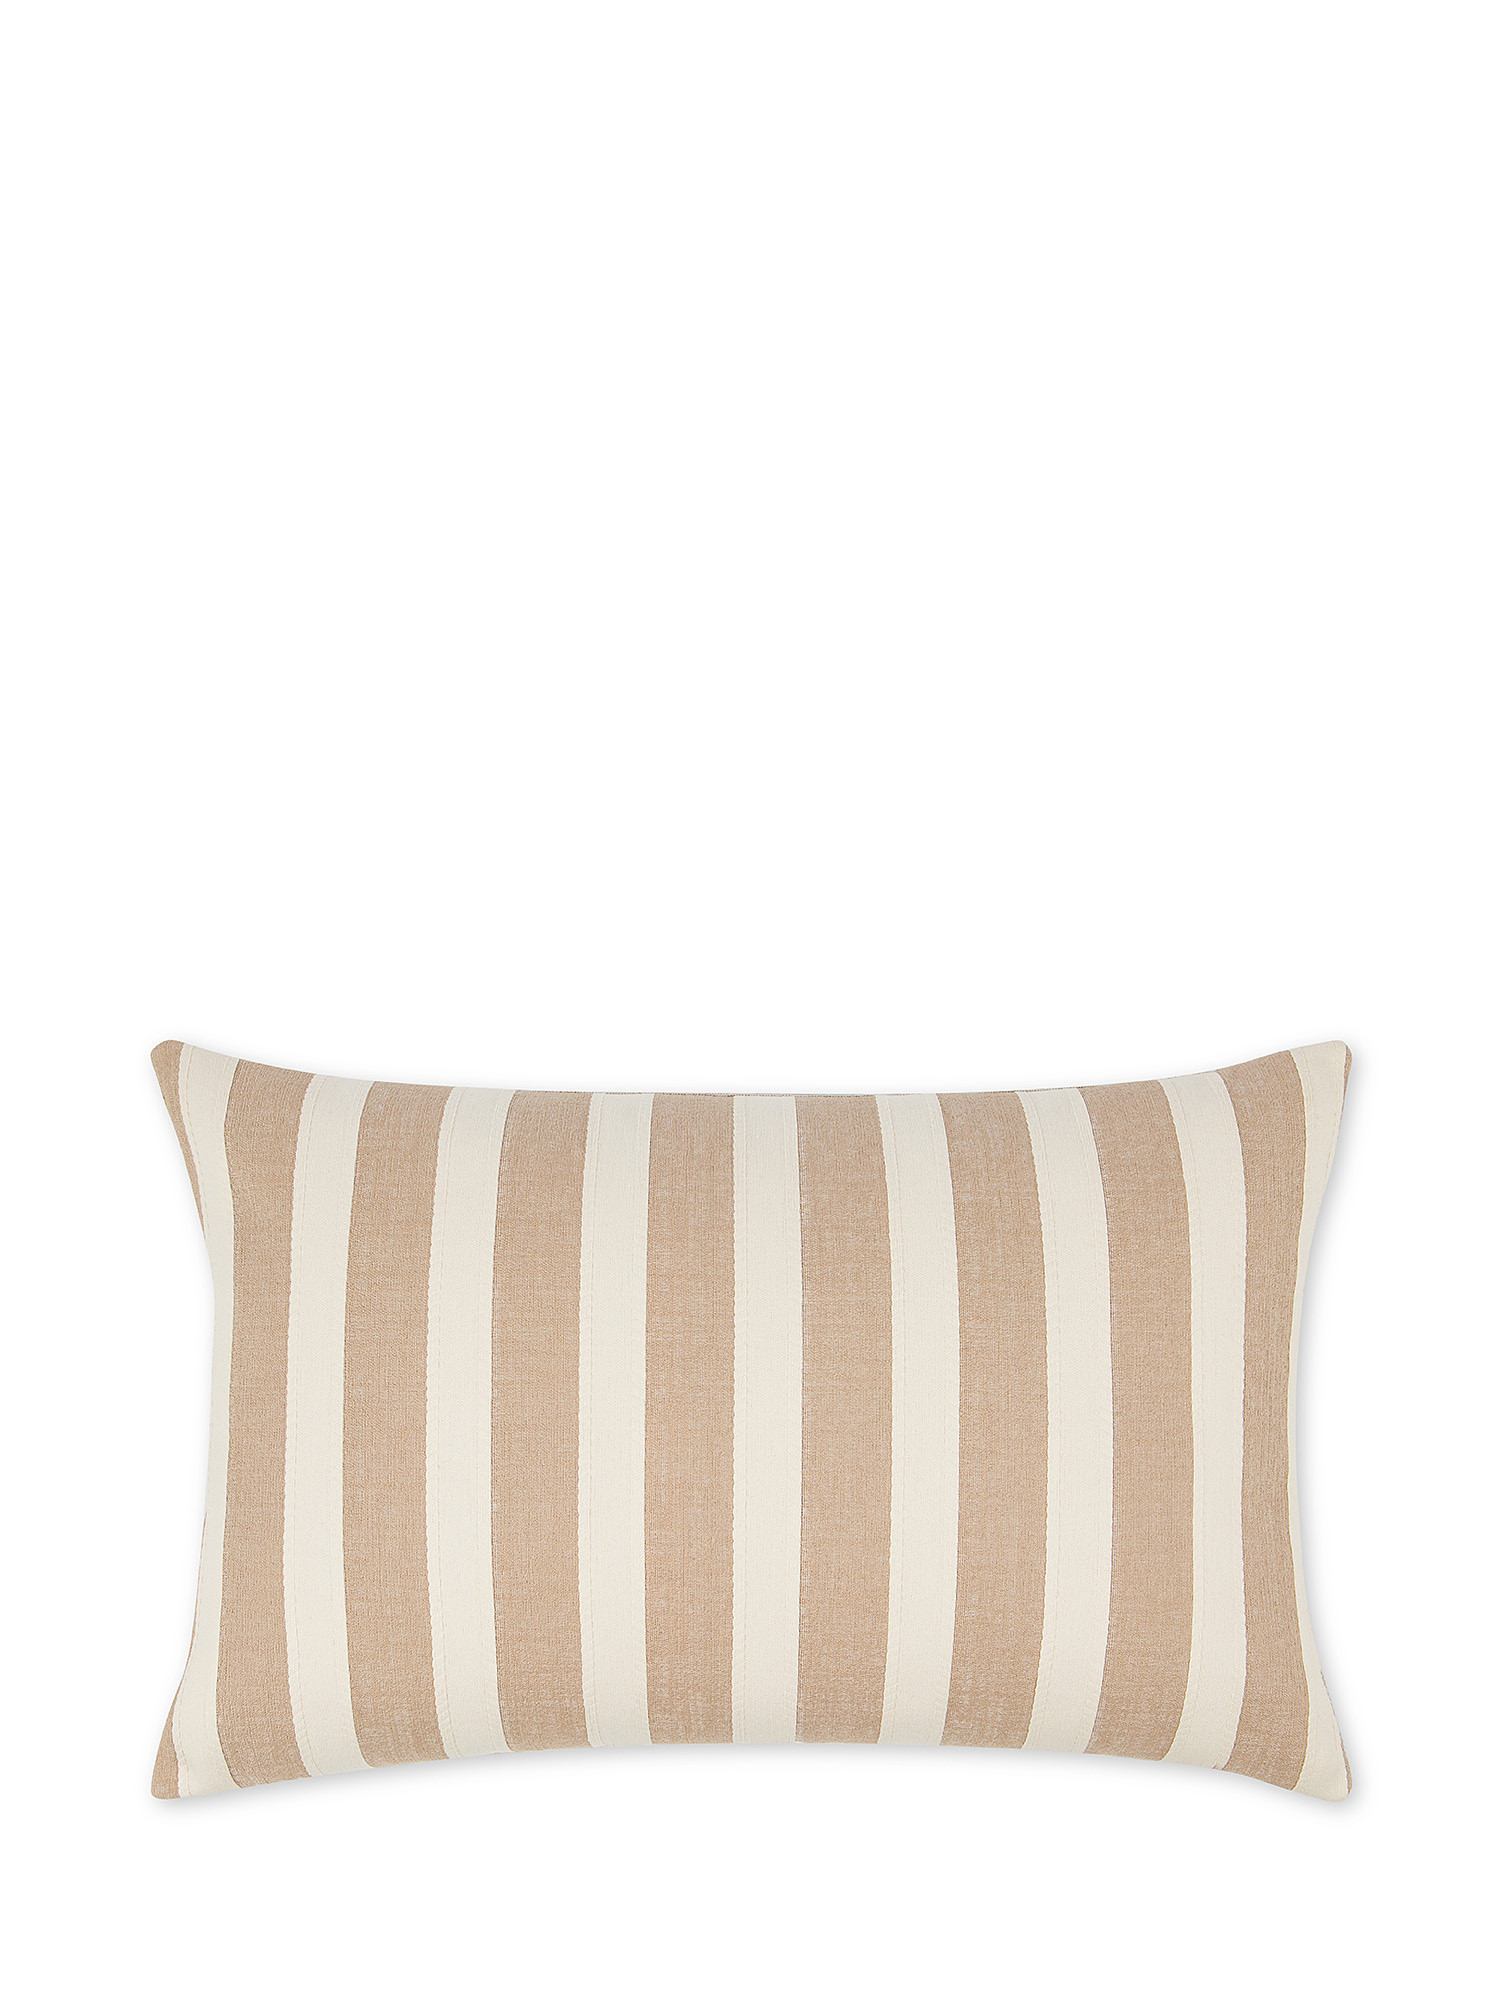 Cushion 35x55 cm with striped pattern, White / Beige, large image number 0